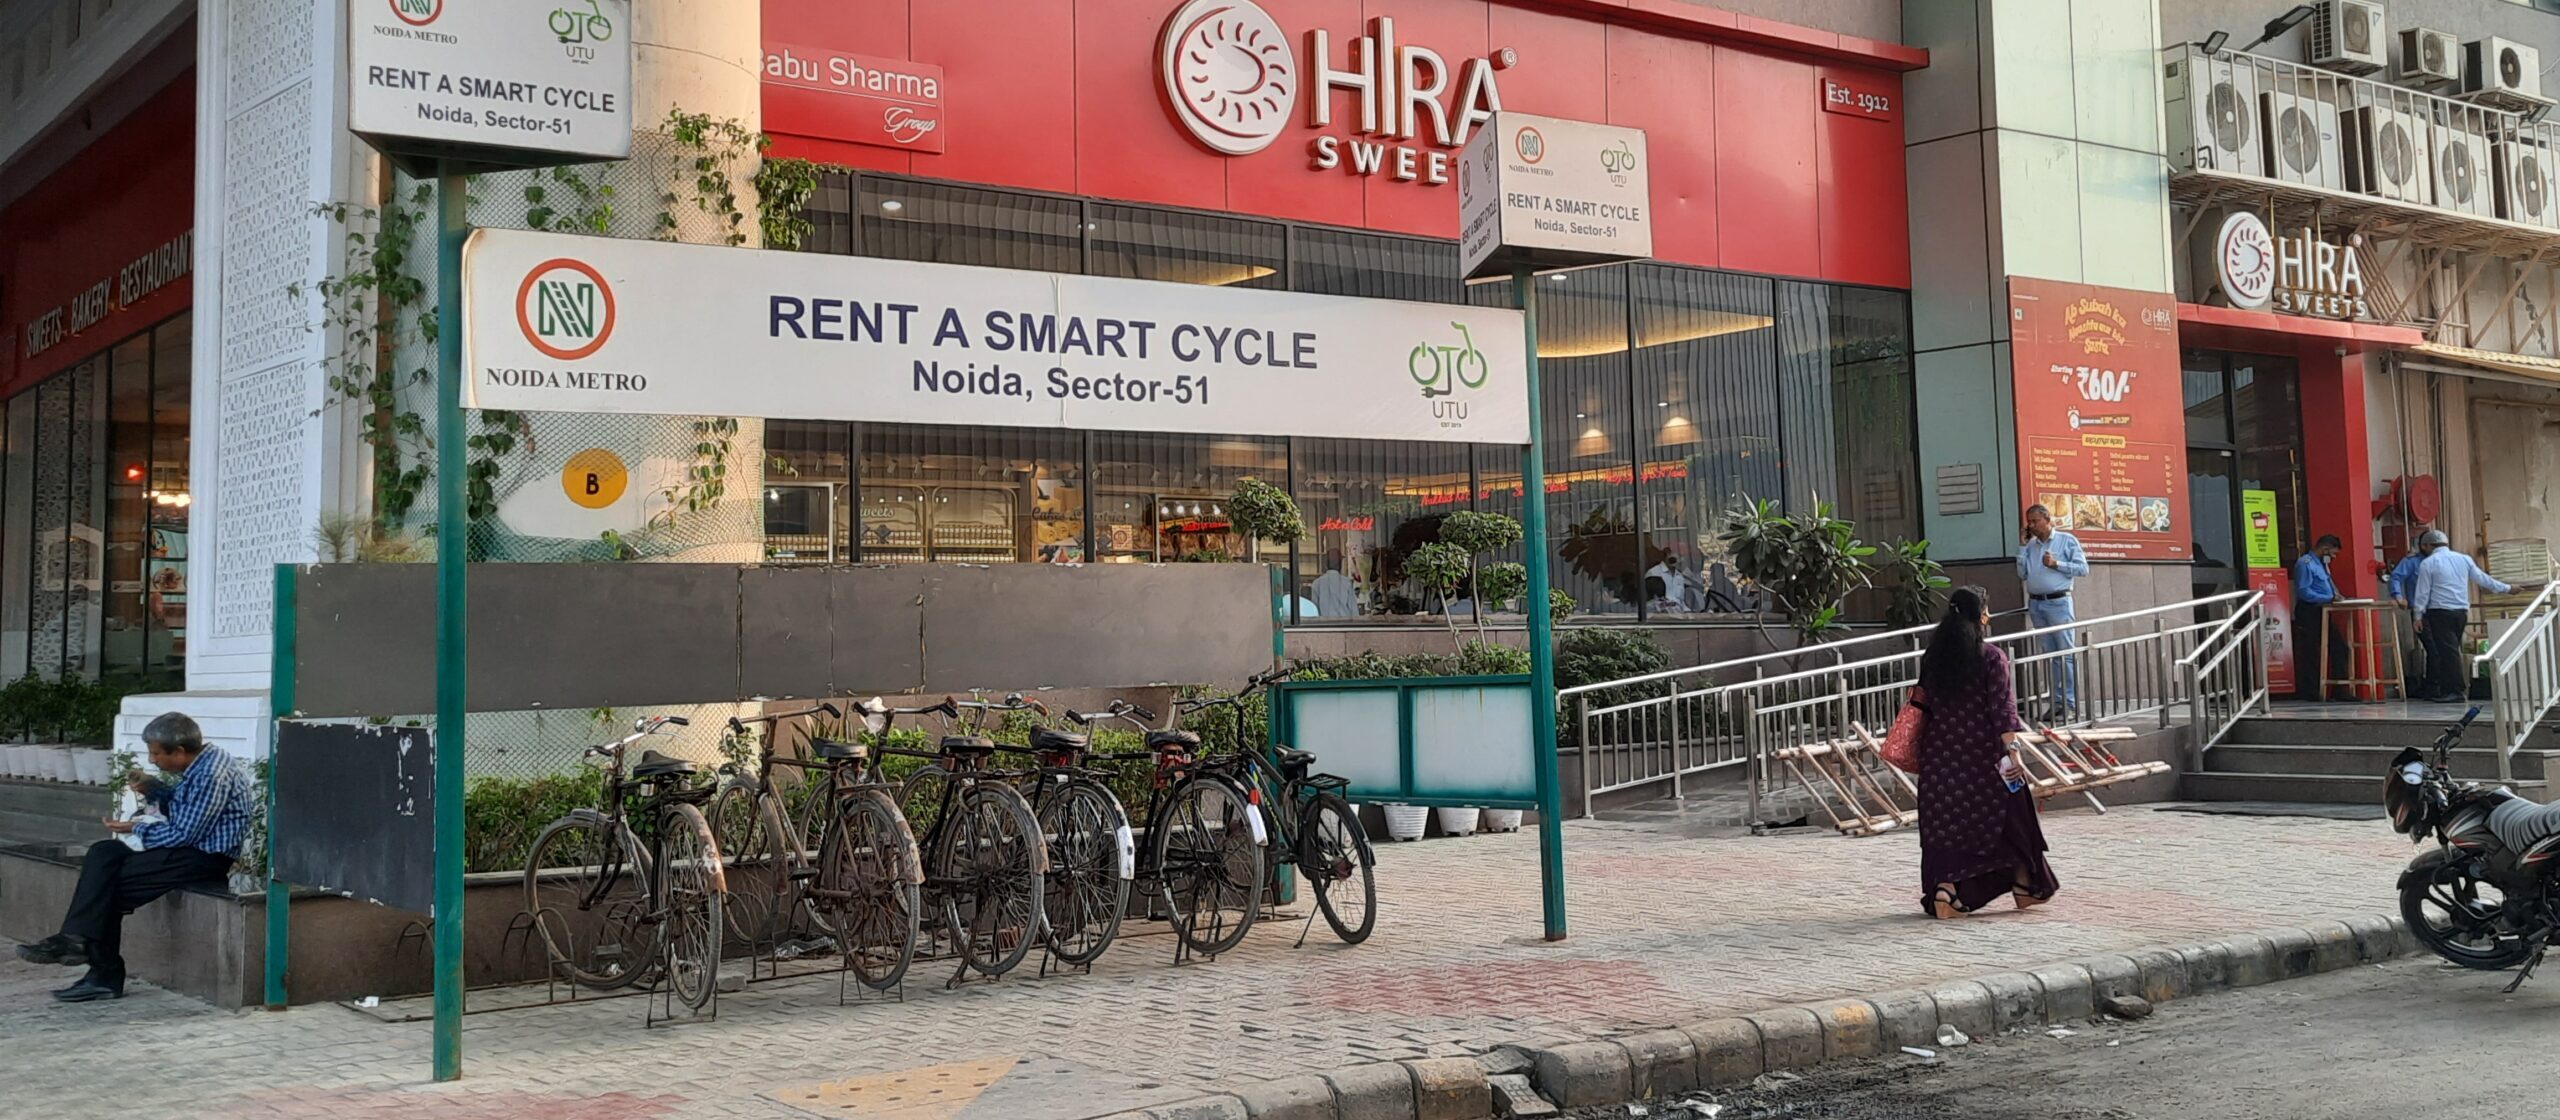 Only a stand, no smart cycles: talks of e-cycles on Noida streets only real on paper